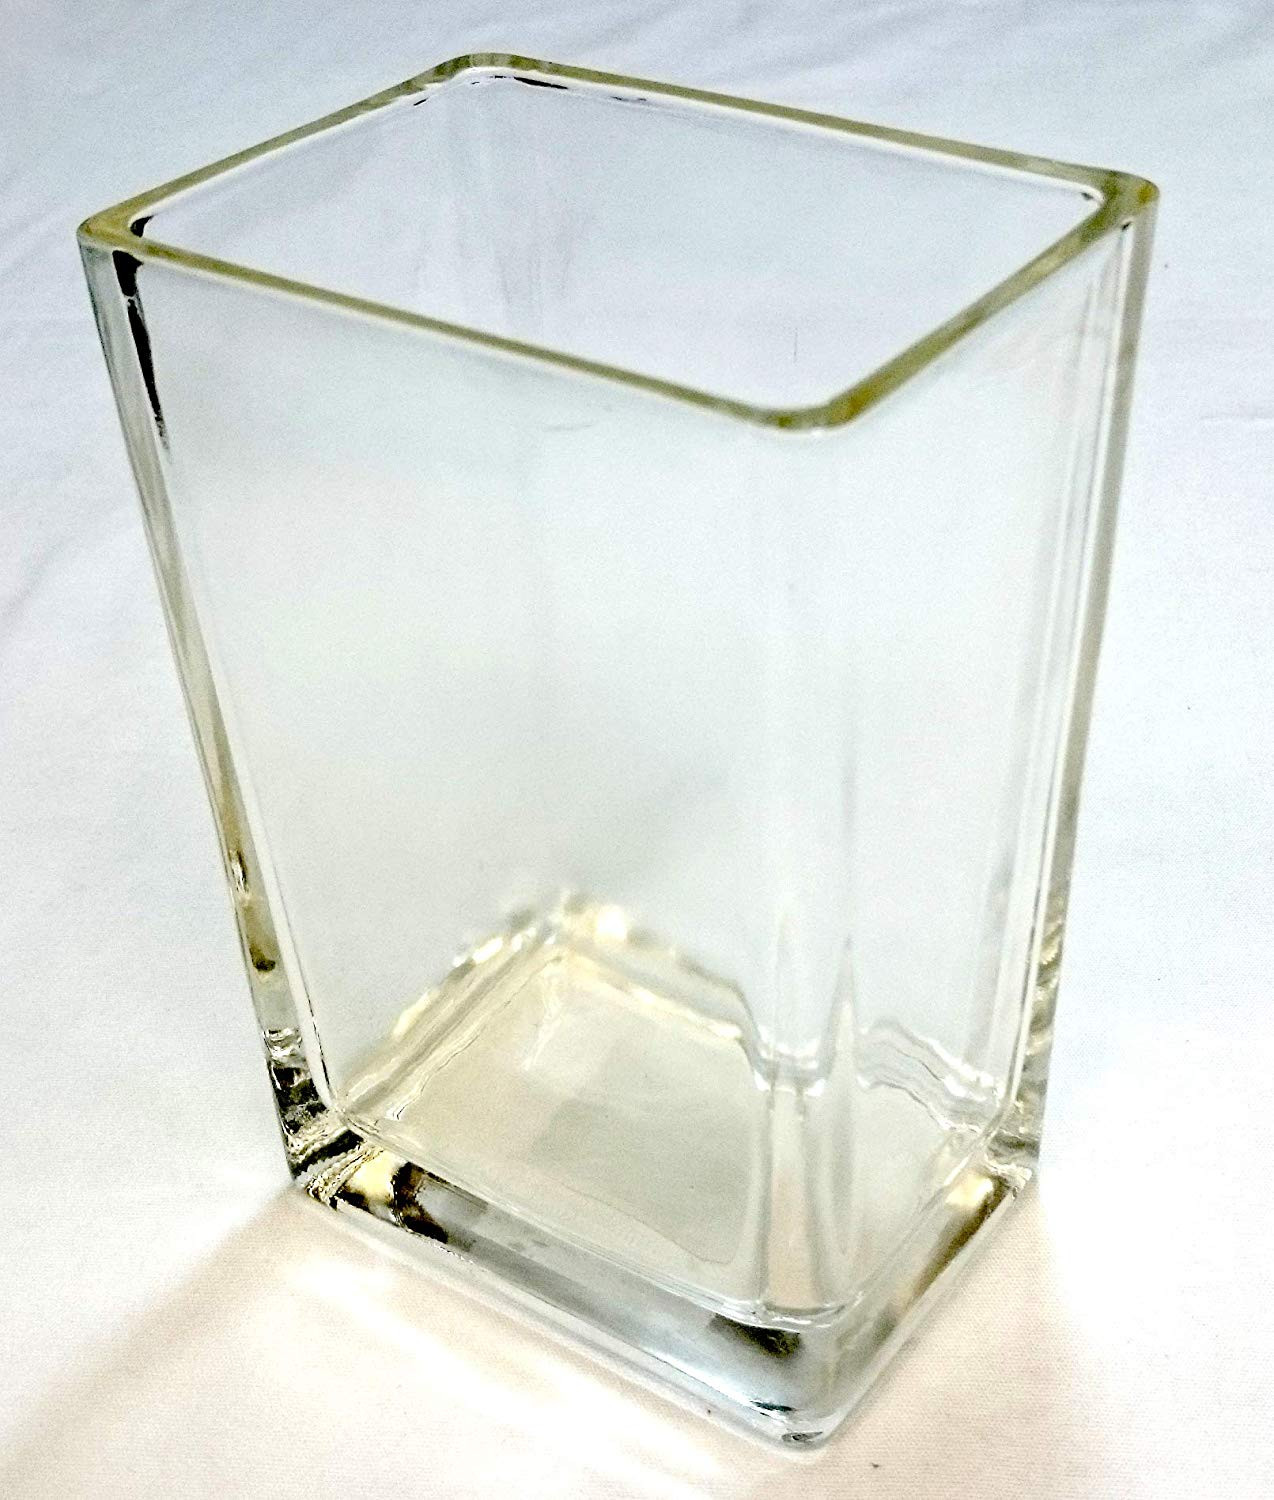 13 Unique Rectangular Glass Vases for Centerpieces 2024 free download rectangular glass vases for centerpieces of amazon com concord global trading 6 rectangle 3x4 base glass vase for amazon com concord global trading 6 rectangle 3x4 base glass vase six inch h